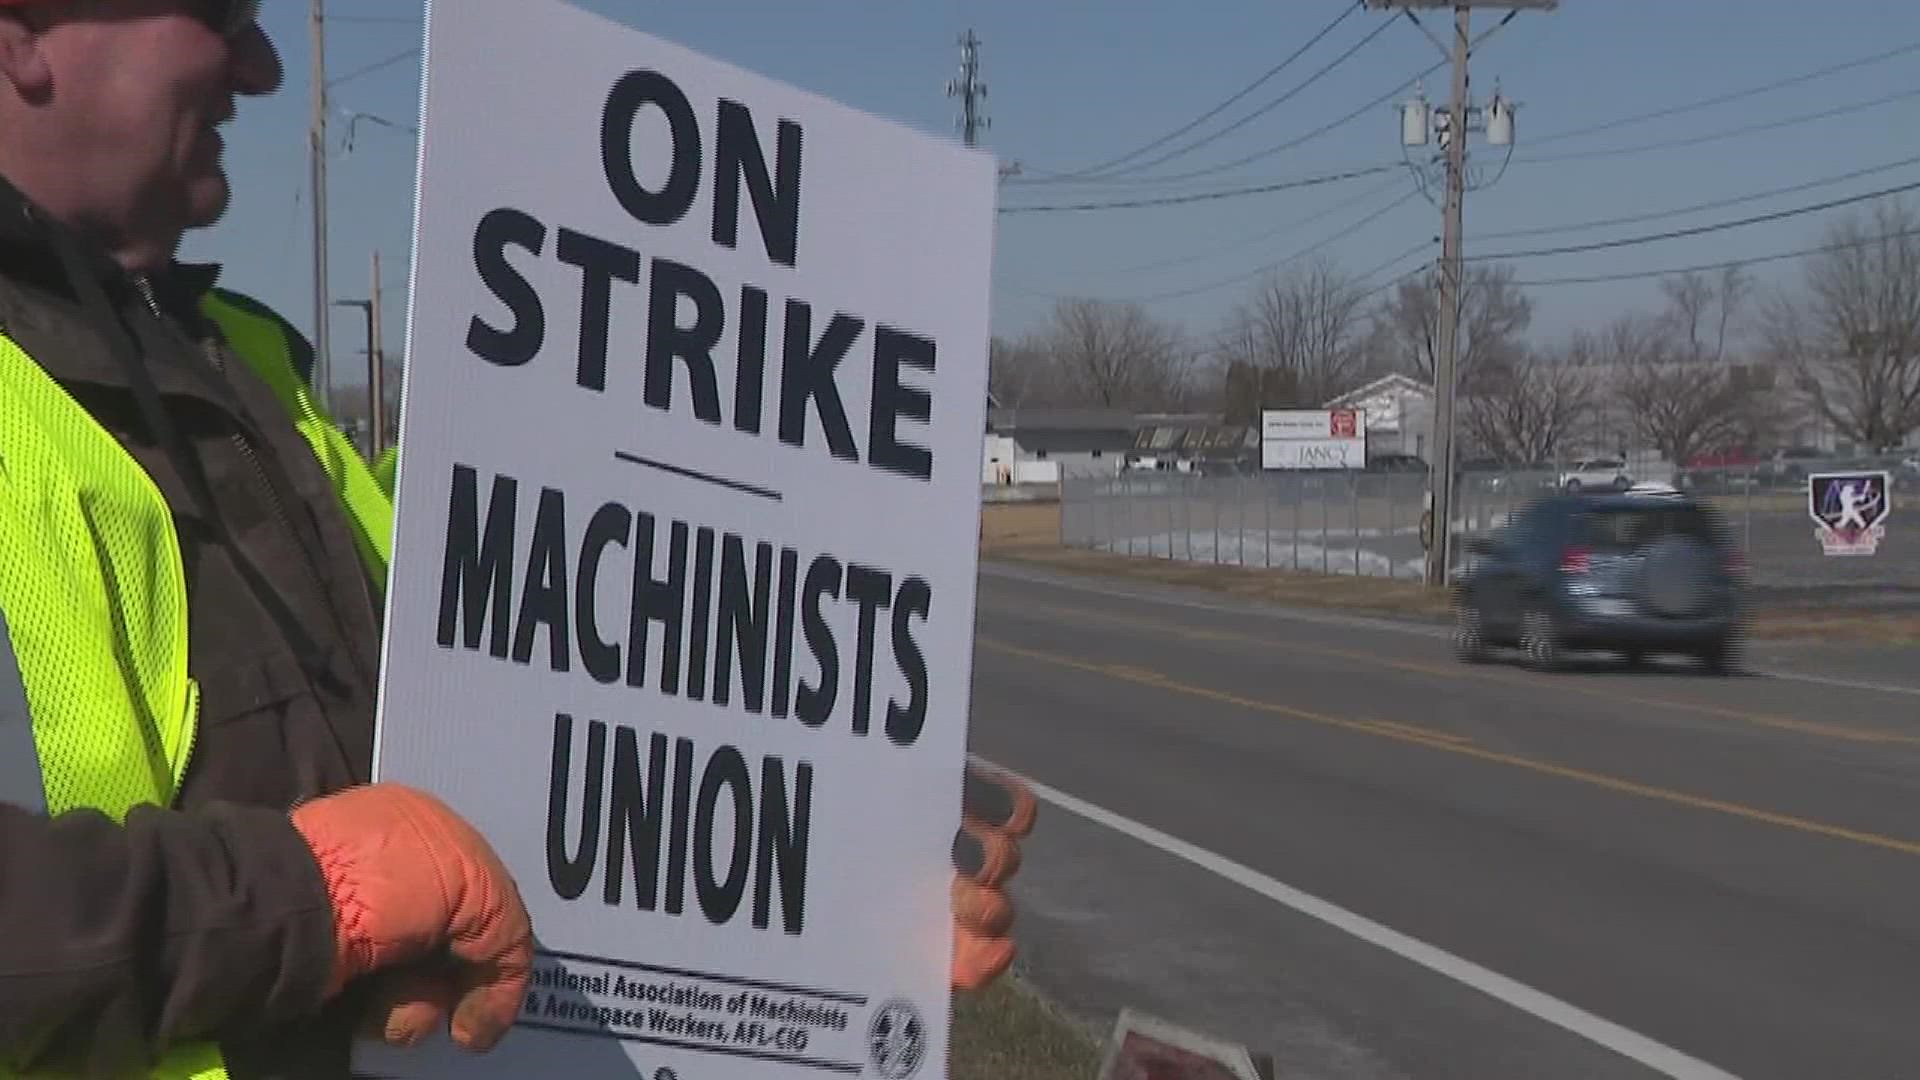 365 union members from Locals 388 and 1191 are now on strike against Eaton Corporation, saying the latest contract offer from Eaton falls flat in 3 key areas.